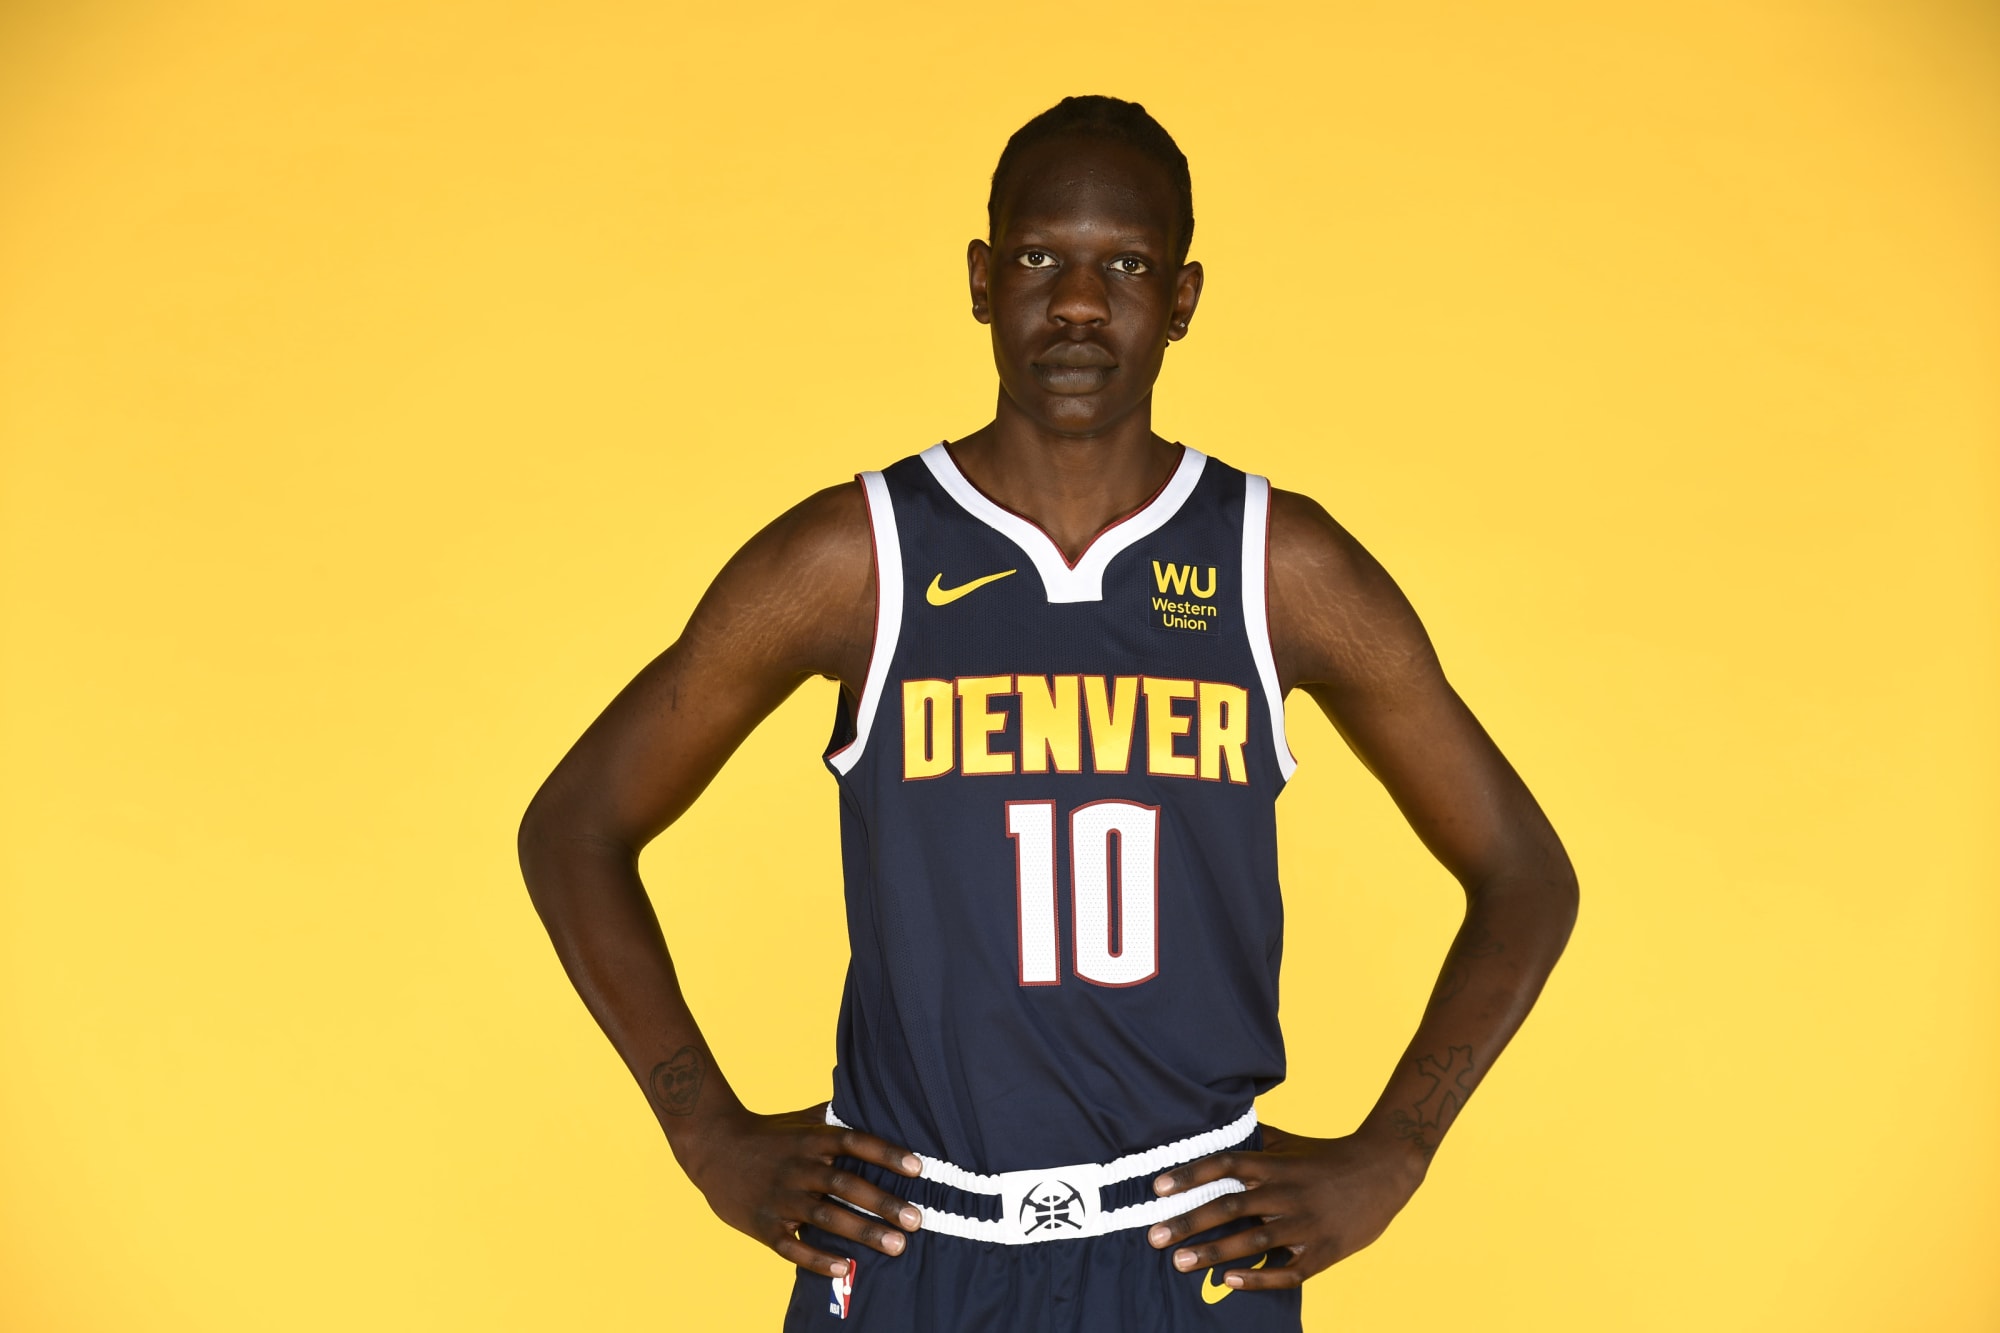 CBS Colorado - This is Bol Bol of the Denver Nuggets. He stands at 7-foot-2  with a 7-7 wingspan. He's the son of the late Manute Bol, who was one of the